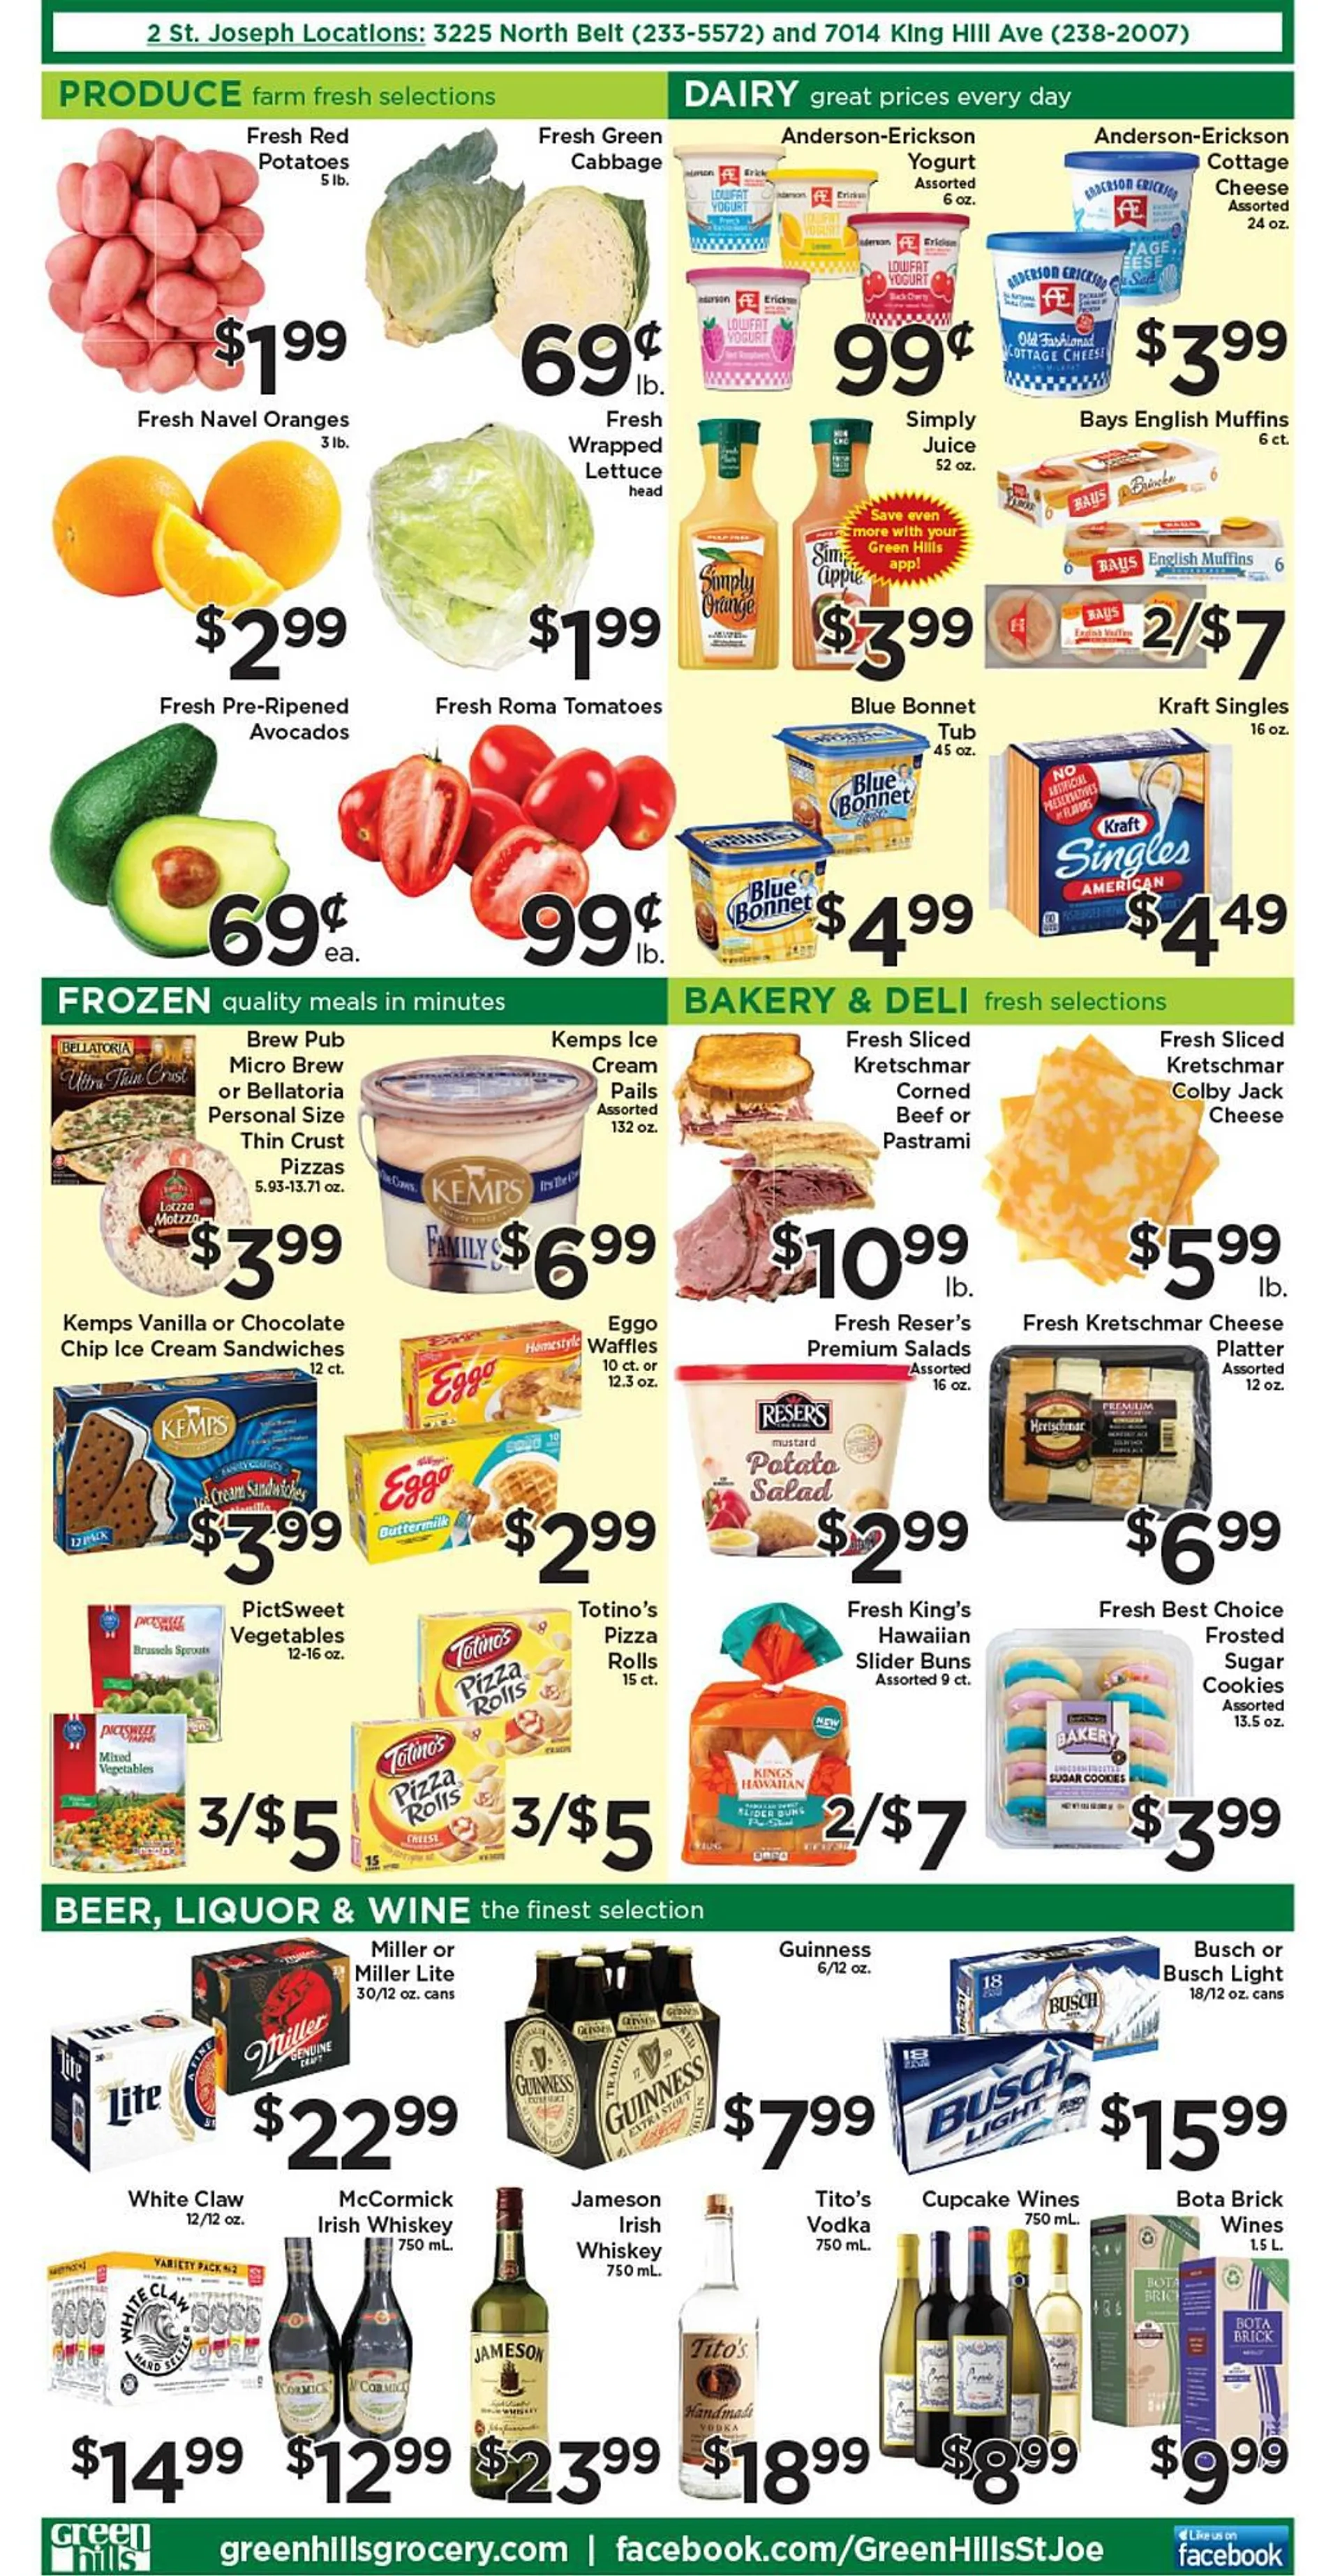 Green Hills Grocery ad - 2